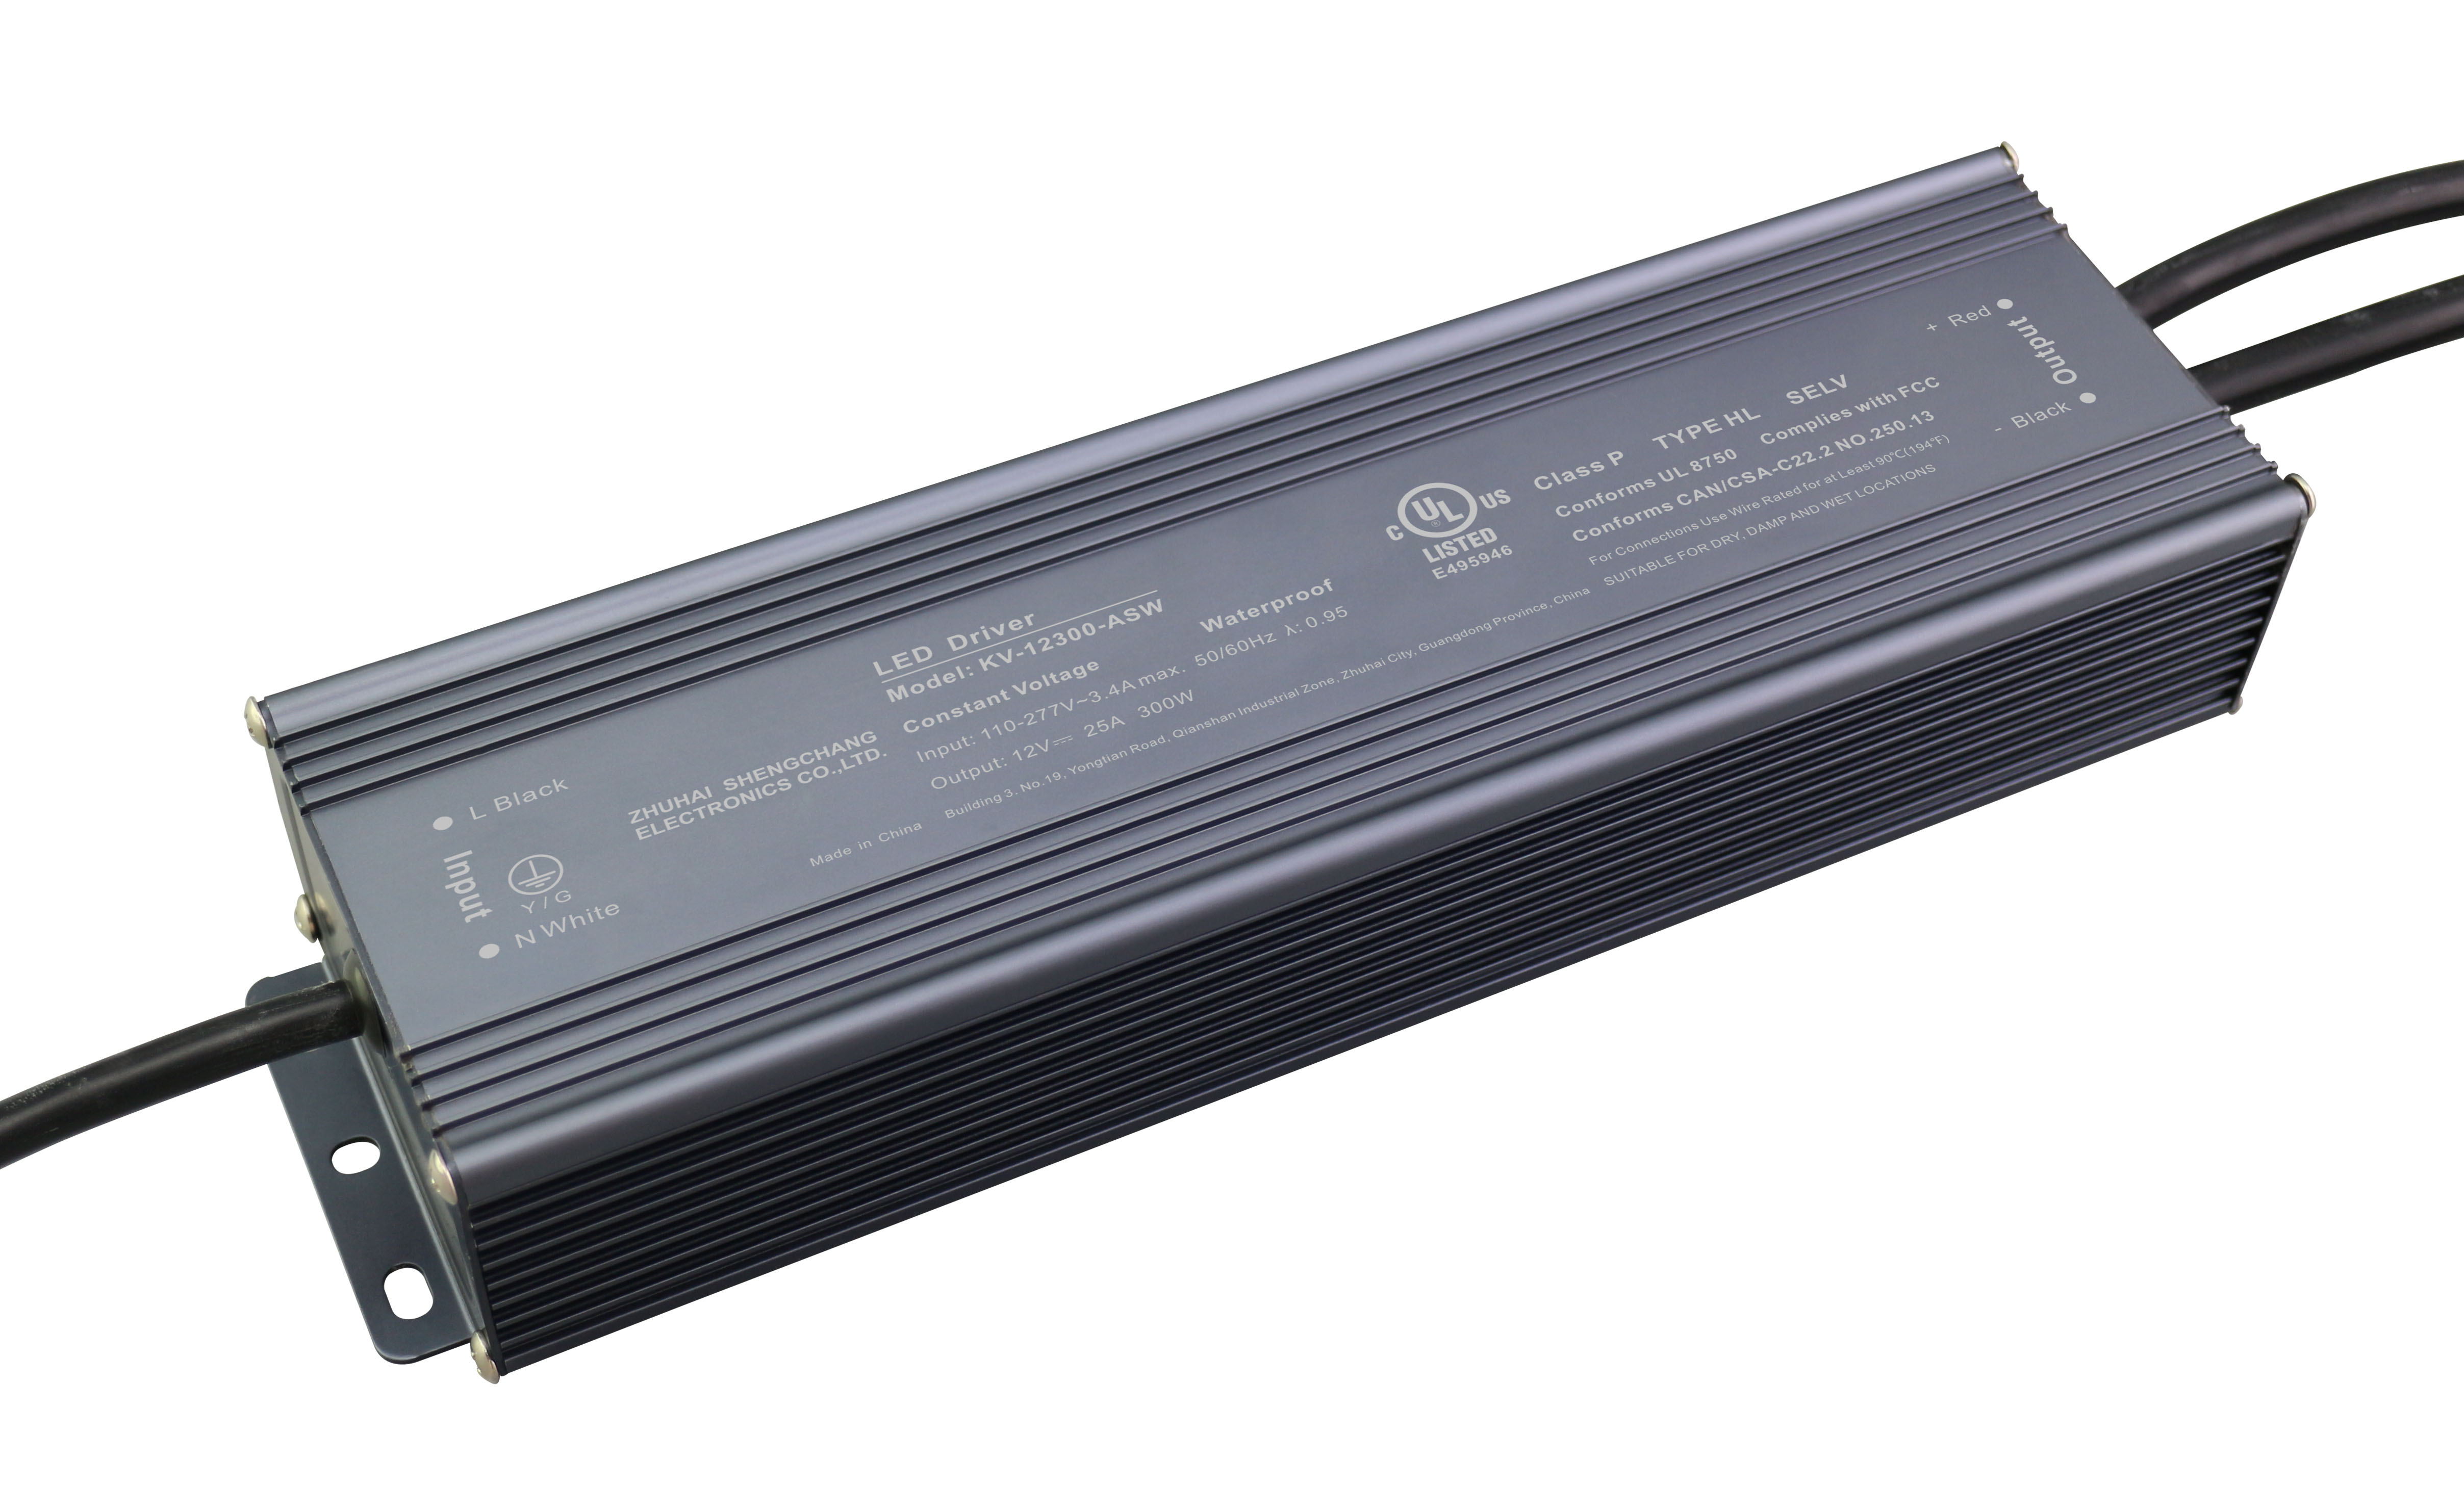 KV-ASW Series 300W Constant Voltage Non-Dimming LED Driver